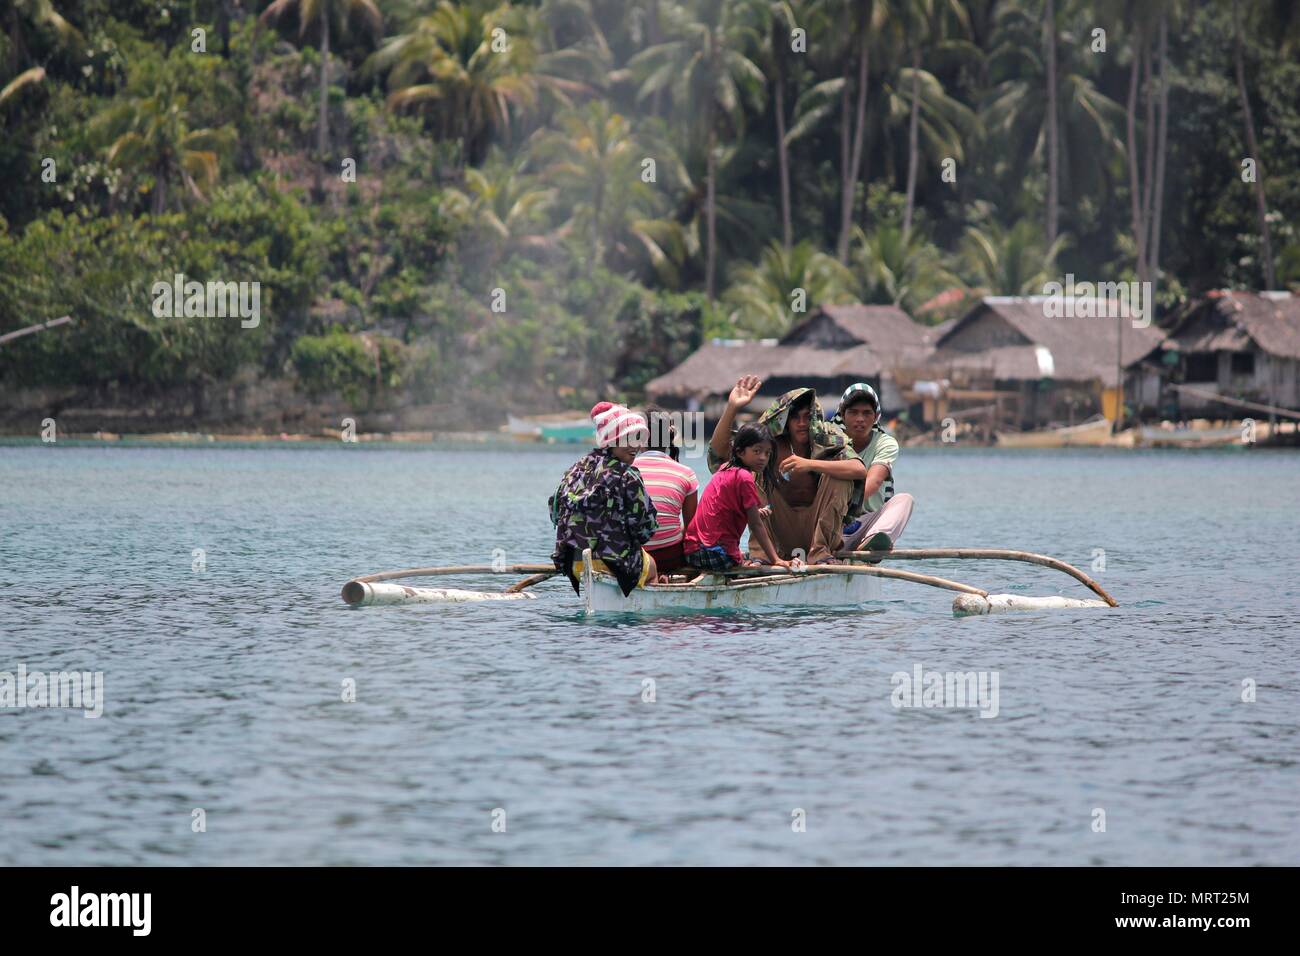 Passengers of a small boat approach the village of Libtong Cove in Cantilan, Surigao del Sur. Stock Photo